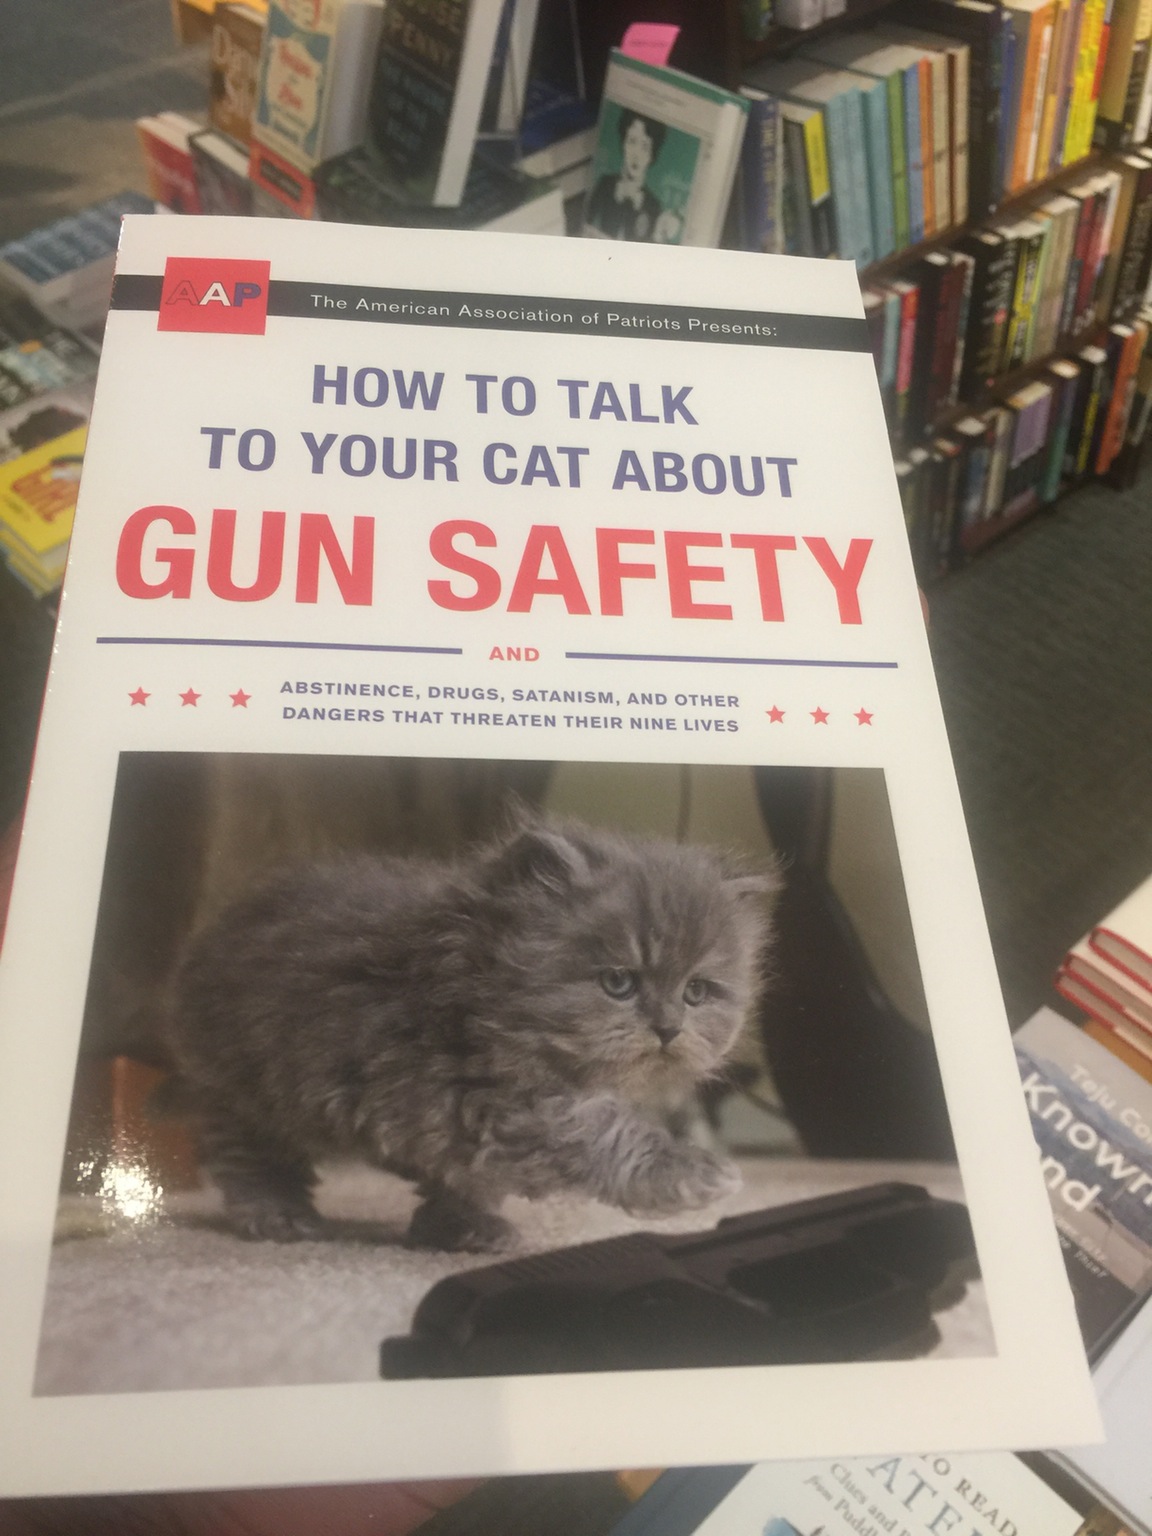 cat safety meme - Aap The American Association of Patriots Presents How To Talk To Your Cat About Gun Safety And Abstinence, Drugs, Satanism, And Other Dangers That Threaten Their Nine Lives Teu Co Know ao Atf Lo Rean from Puddi